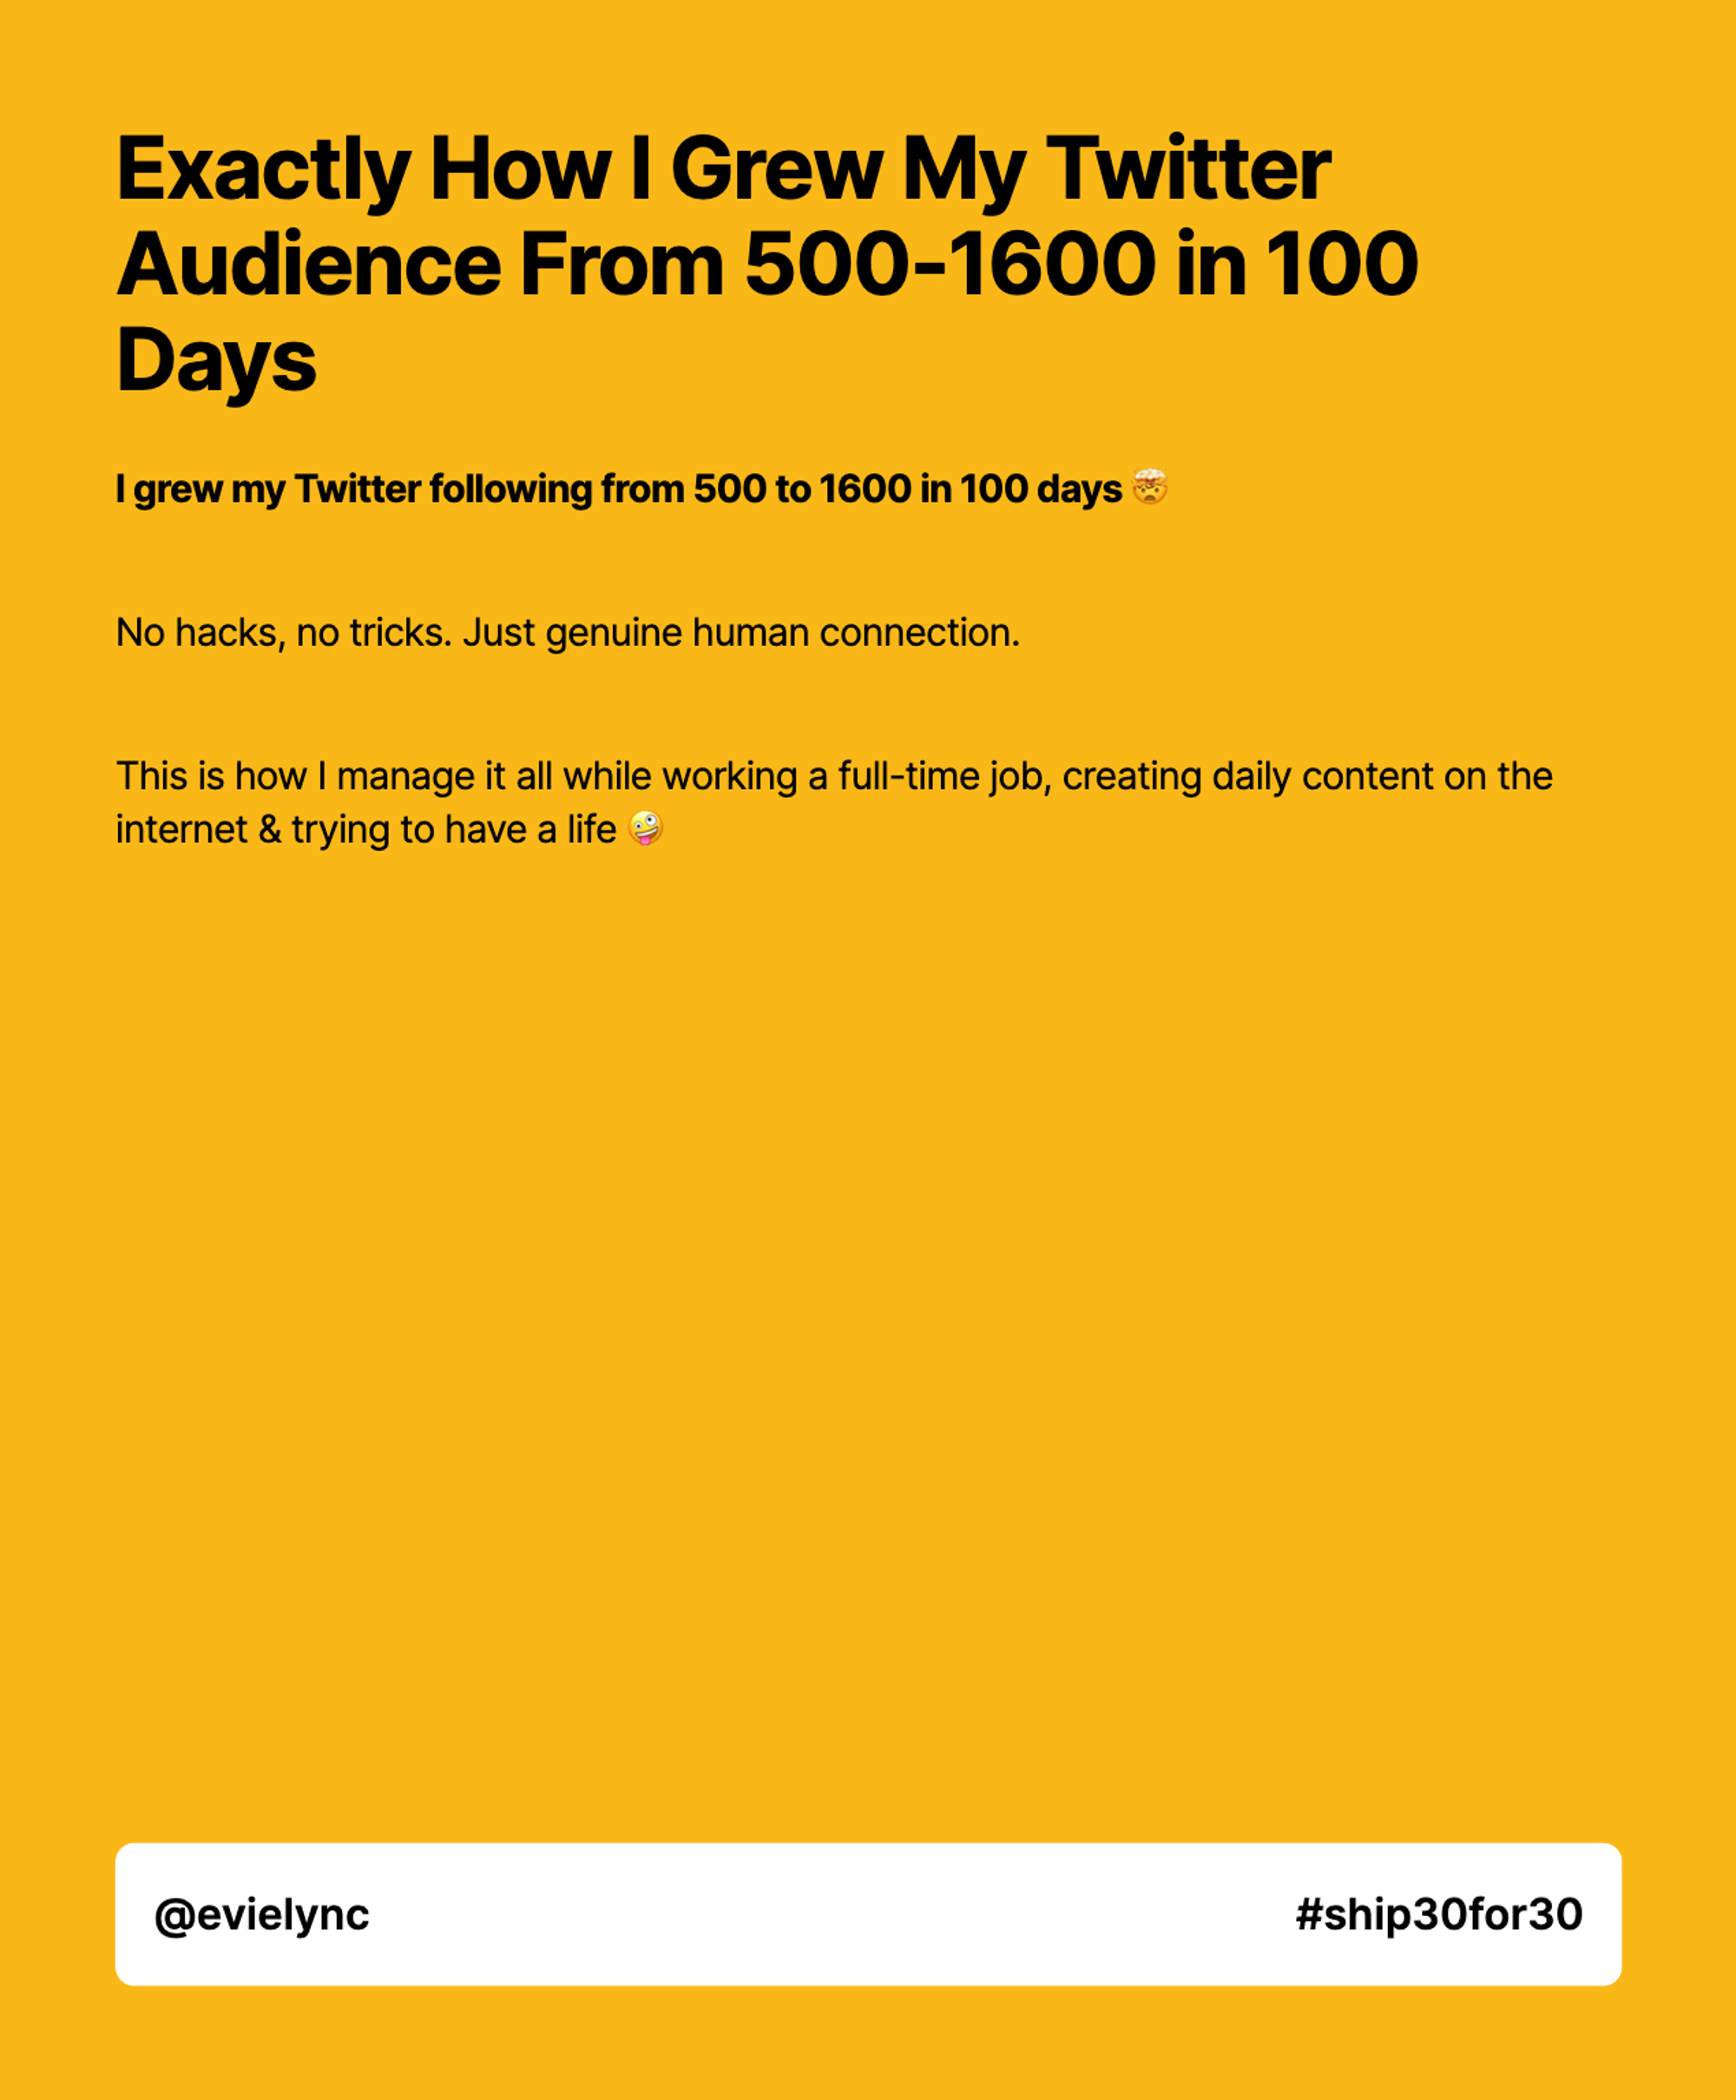 Exactly How I Grew My Twitter Audience From 500-1600 in 100 Days